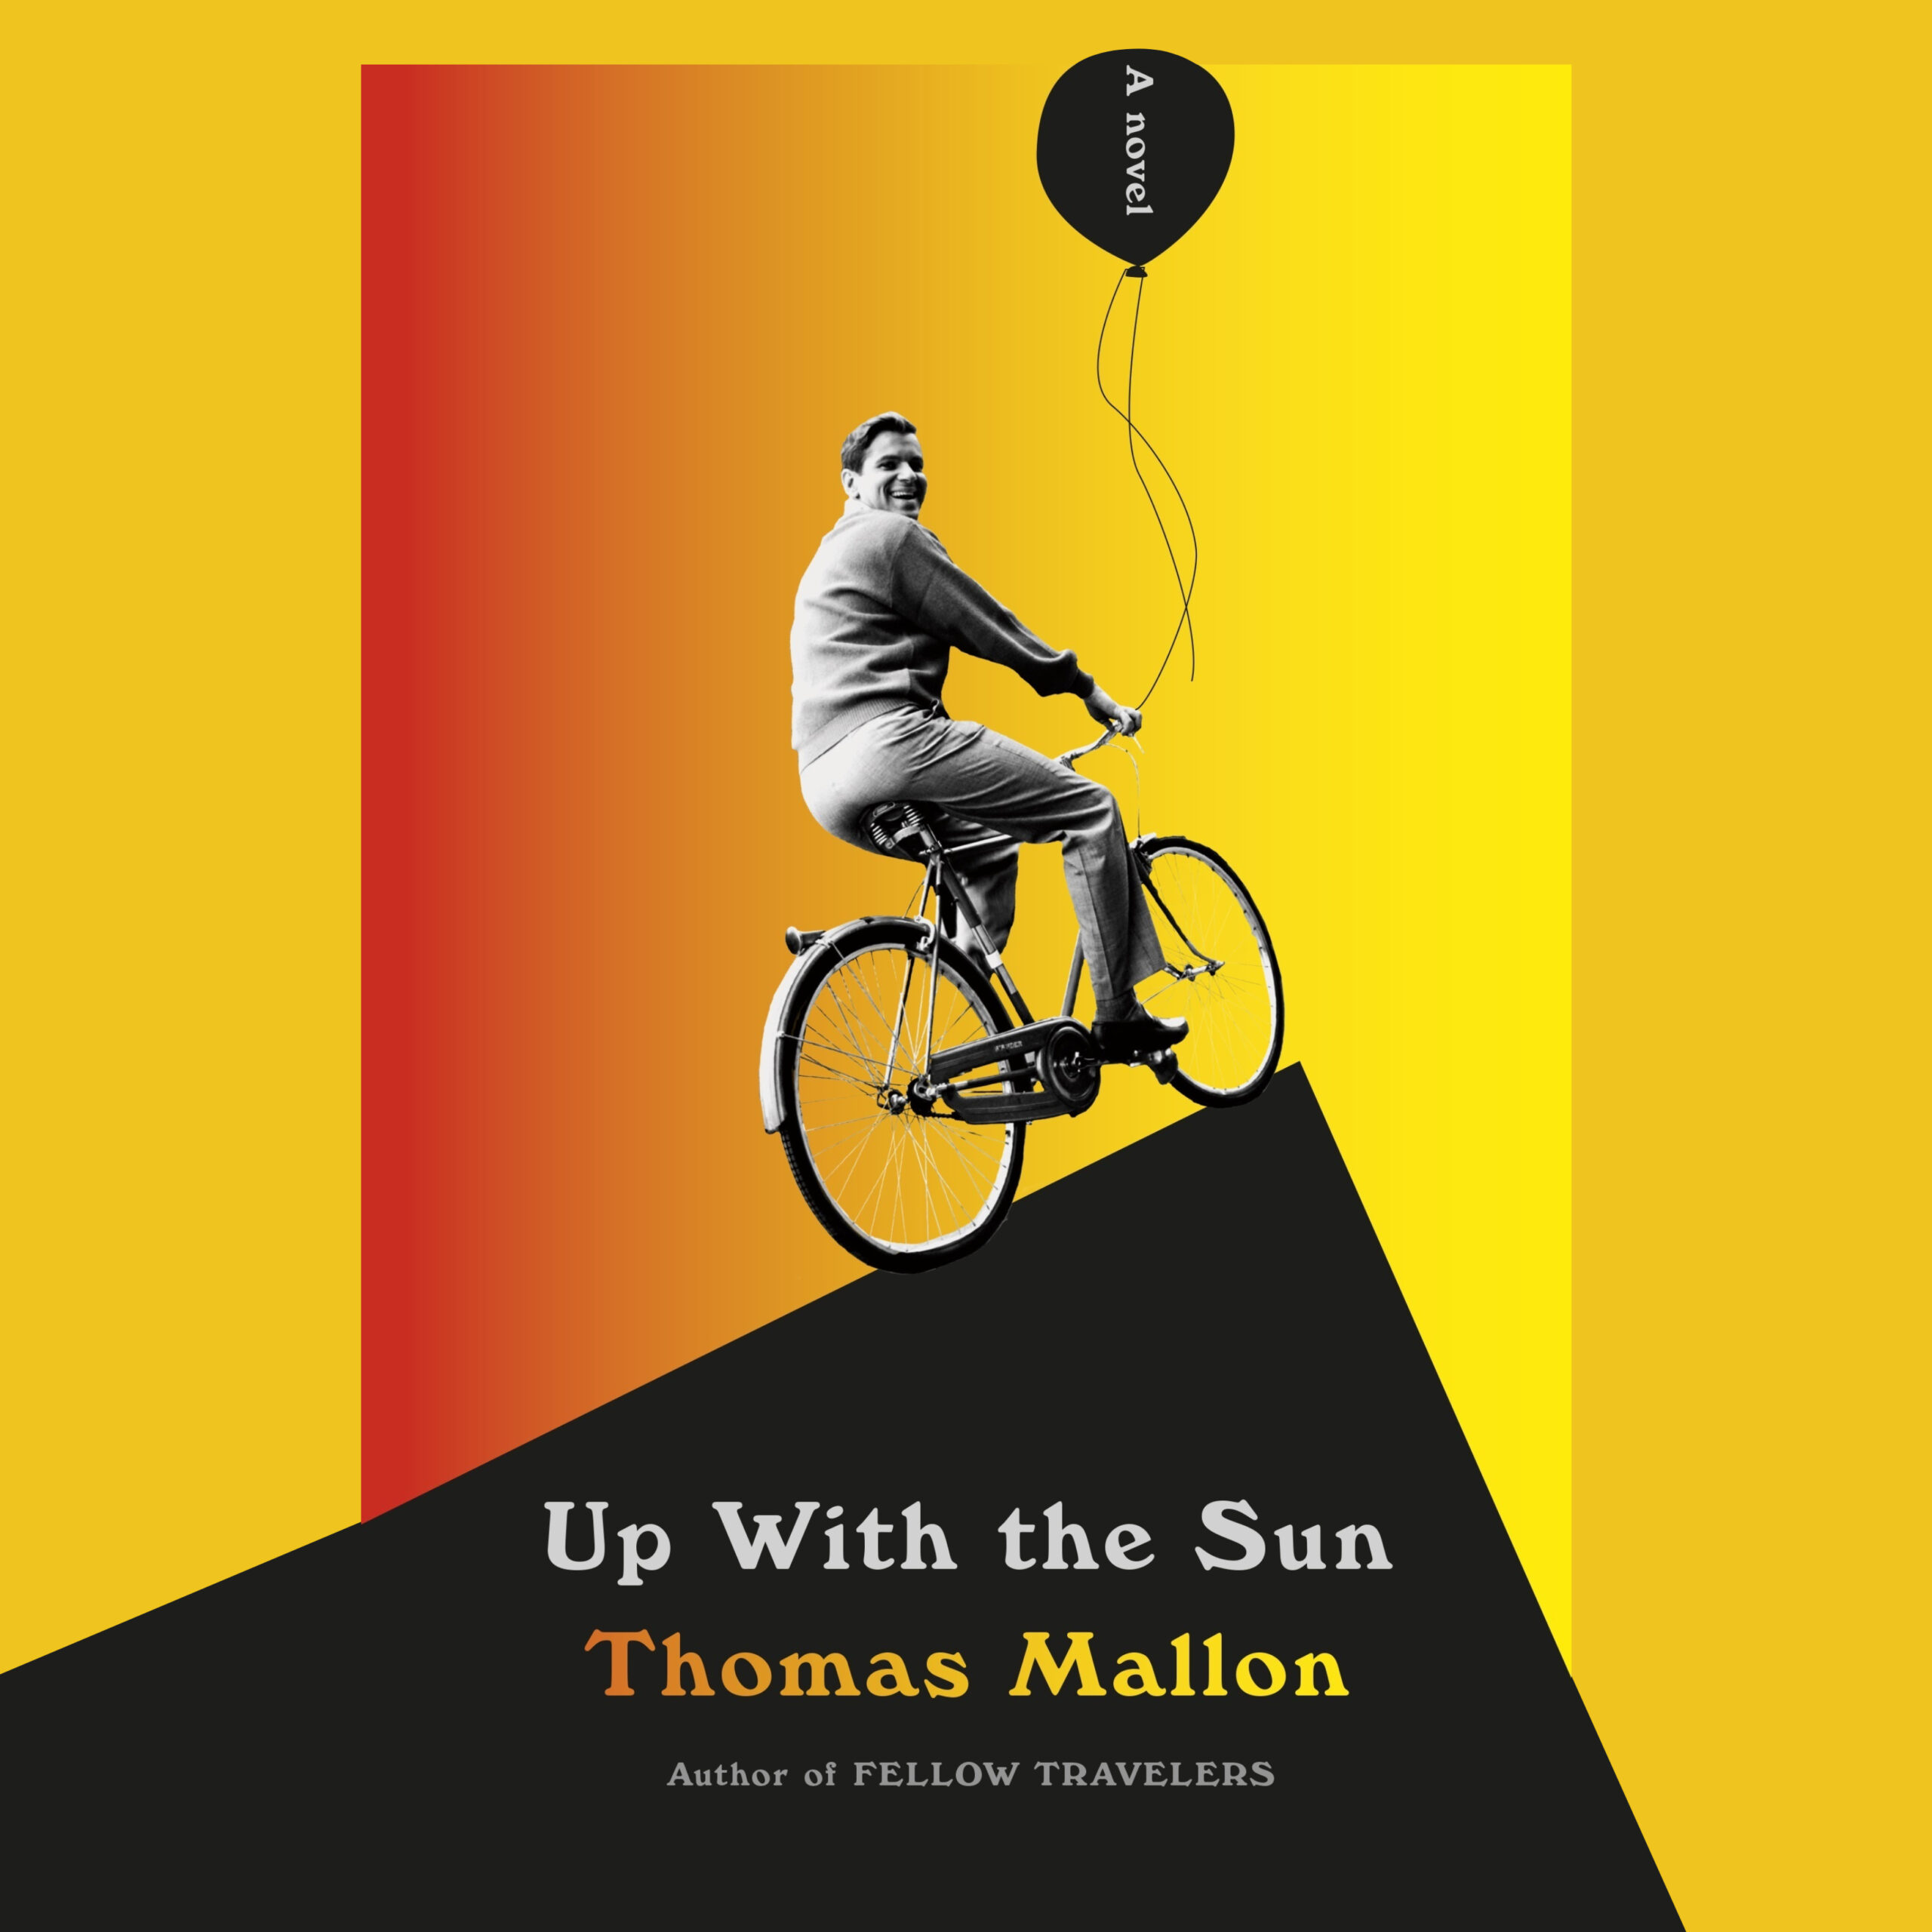 1809 - Thomas Mallon - Up With the Sun | The Book Show